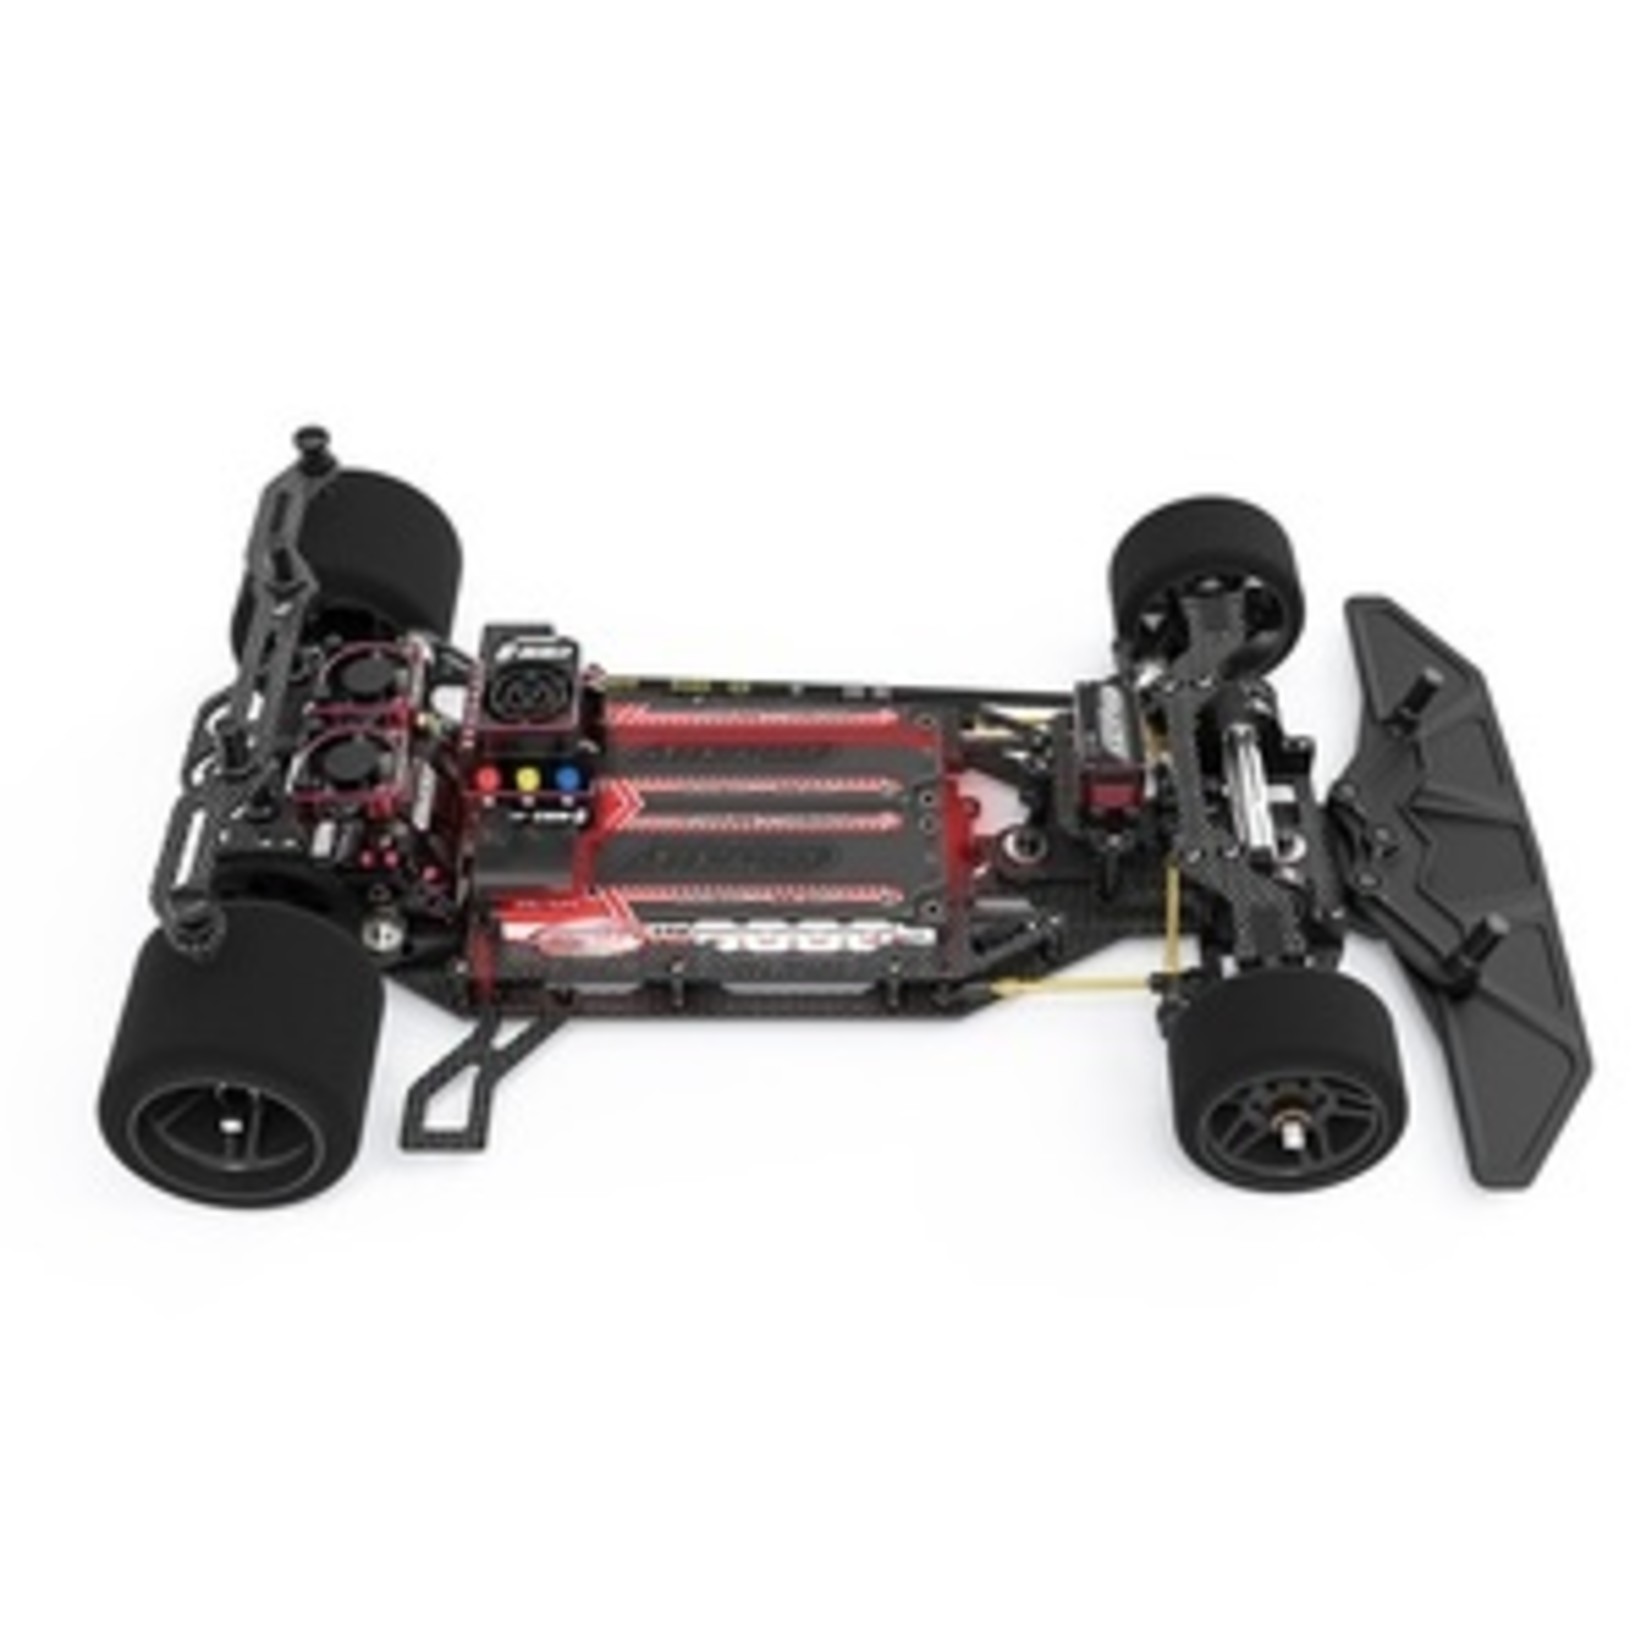 Corally (Team Corally) COR00133  1/8 SSX-823 On Road Pan Car Chassis Kit (No Body, Motor, Tires or Electronics)